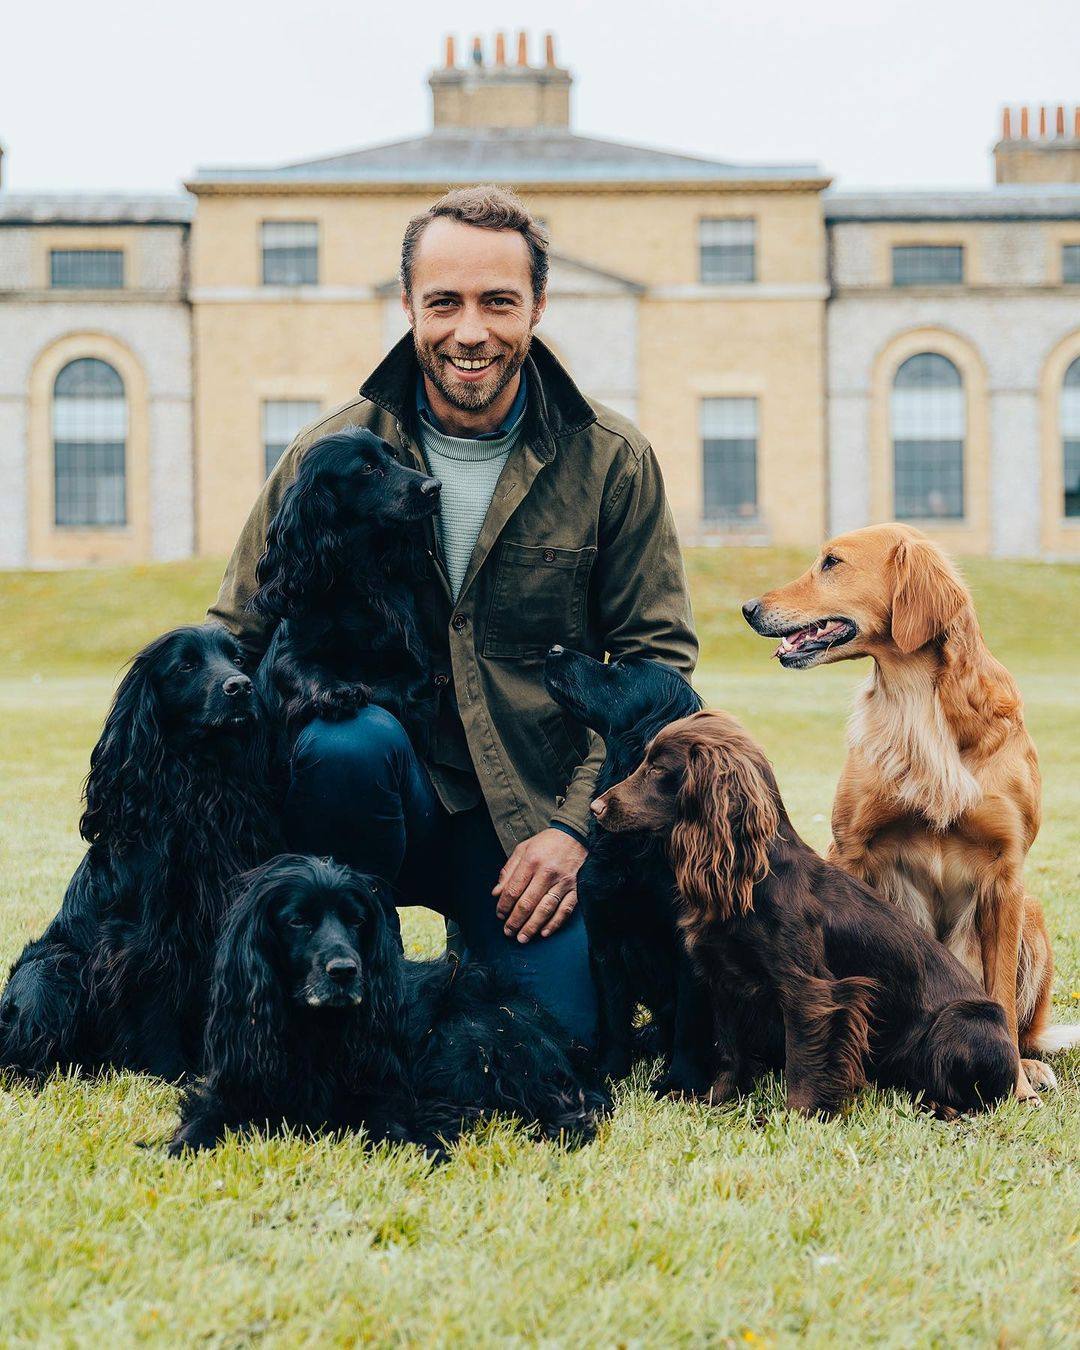 James Middleton is the 35-year-old brother of Kate Middleton. Photo: @jmidy/Instagram